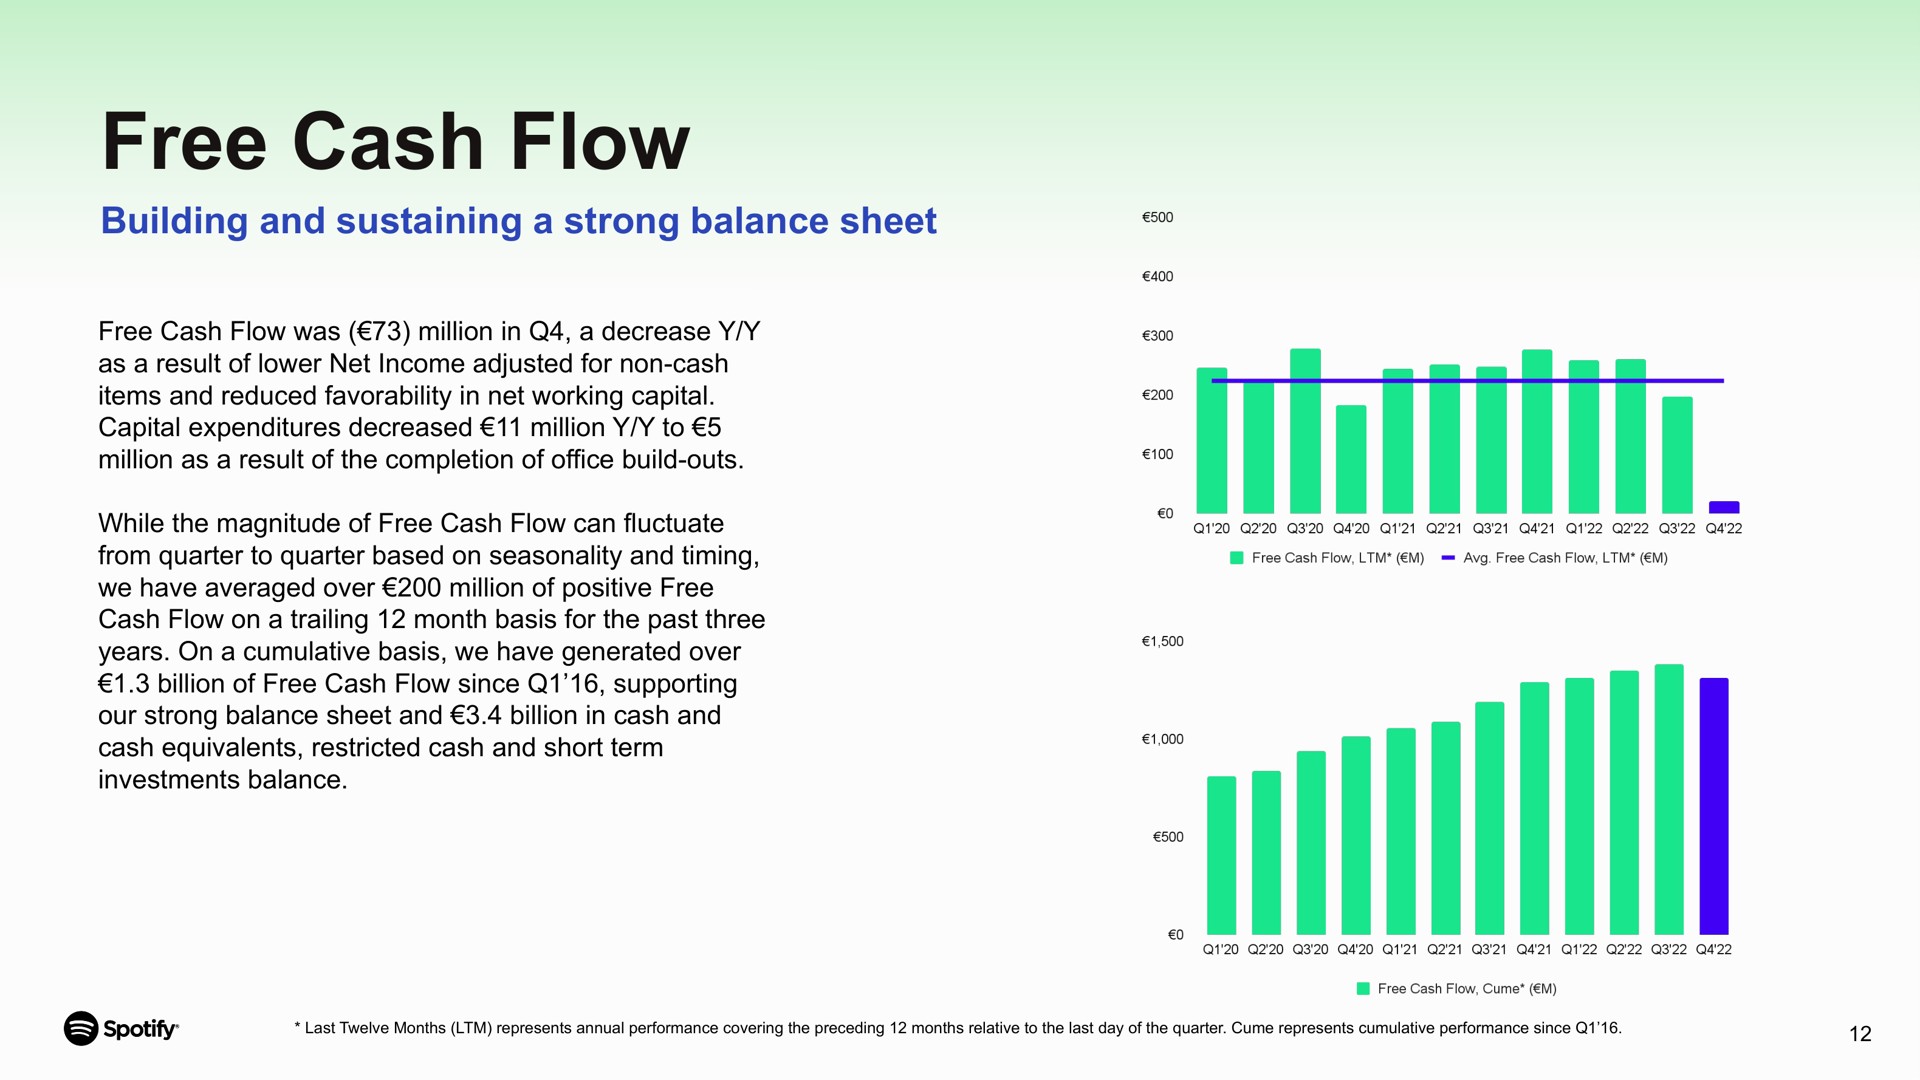 free cash flow building and sustaining a strong balance sheet was million in decrease as result of lower net income adjusted for non cash items reduced in net working capital capital expenditures decreased million to million as result of the completion of office build outs from quarter to quarter based on seasonality timing we have averaged over million of positive on trailing month basis for the past three years on cumulative basis we have generated over billion of since supporting our billion in equivalents restricted short term investments i | Spotify